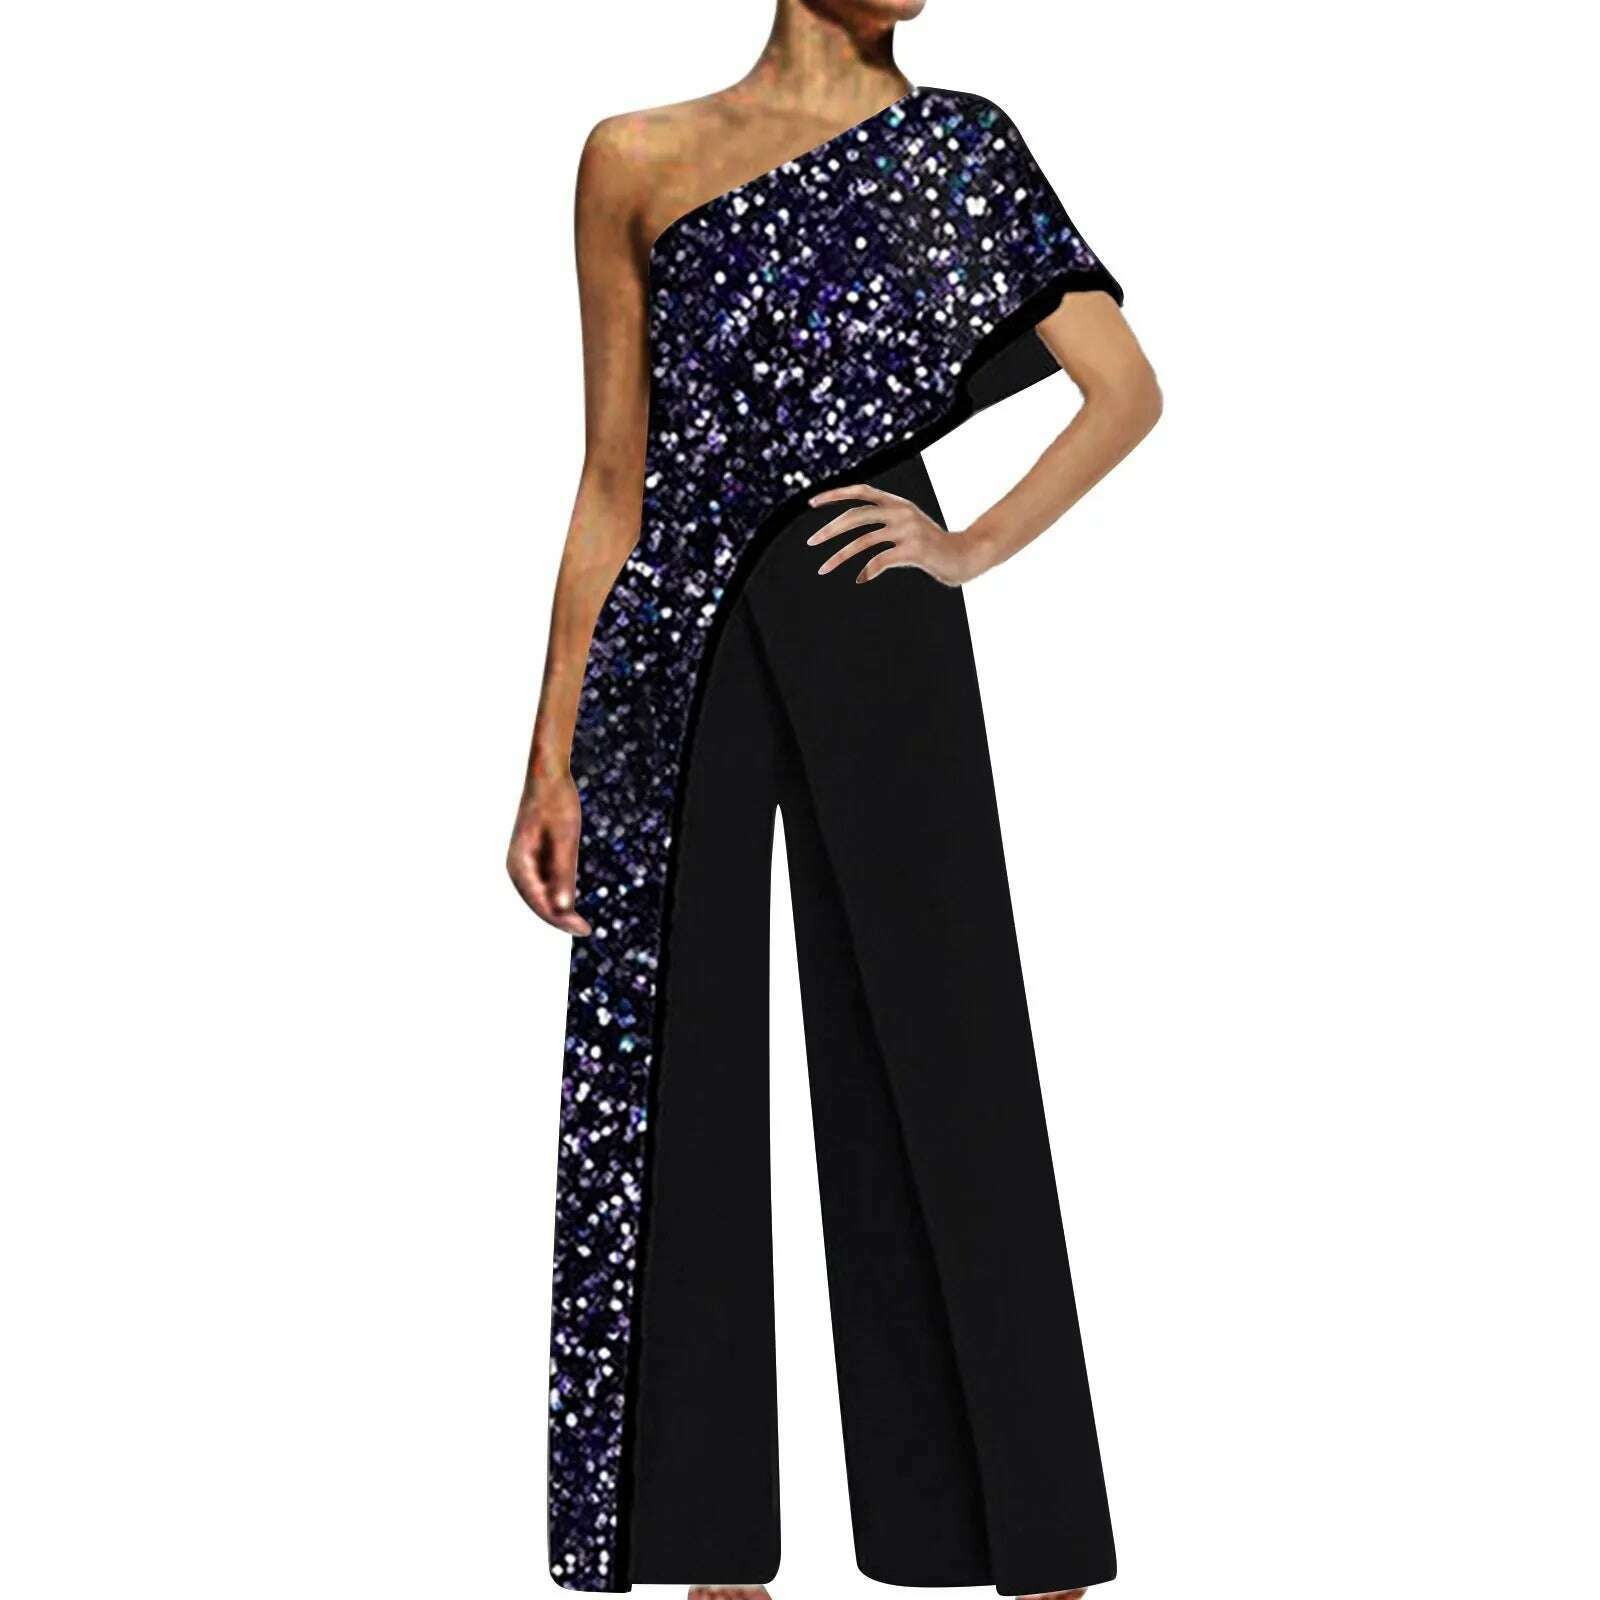 KIMLUD, Sexy Jumpsuits For Women Sequins 3d Printed Summer New One Shoulder Contrast Color Sleeveless Casual Party Wide Leg Jumpsuit, KIMLUD Womens Clothes